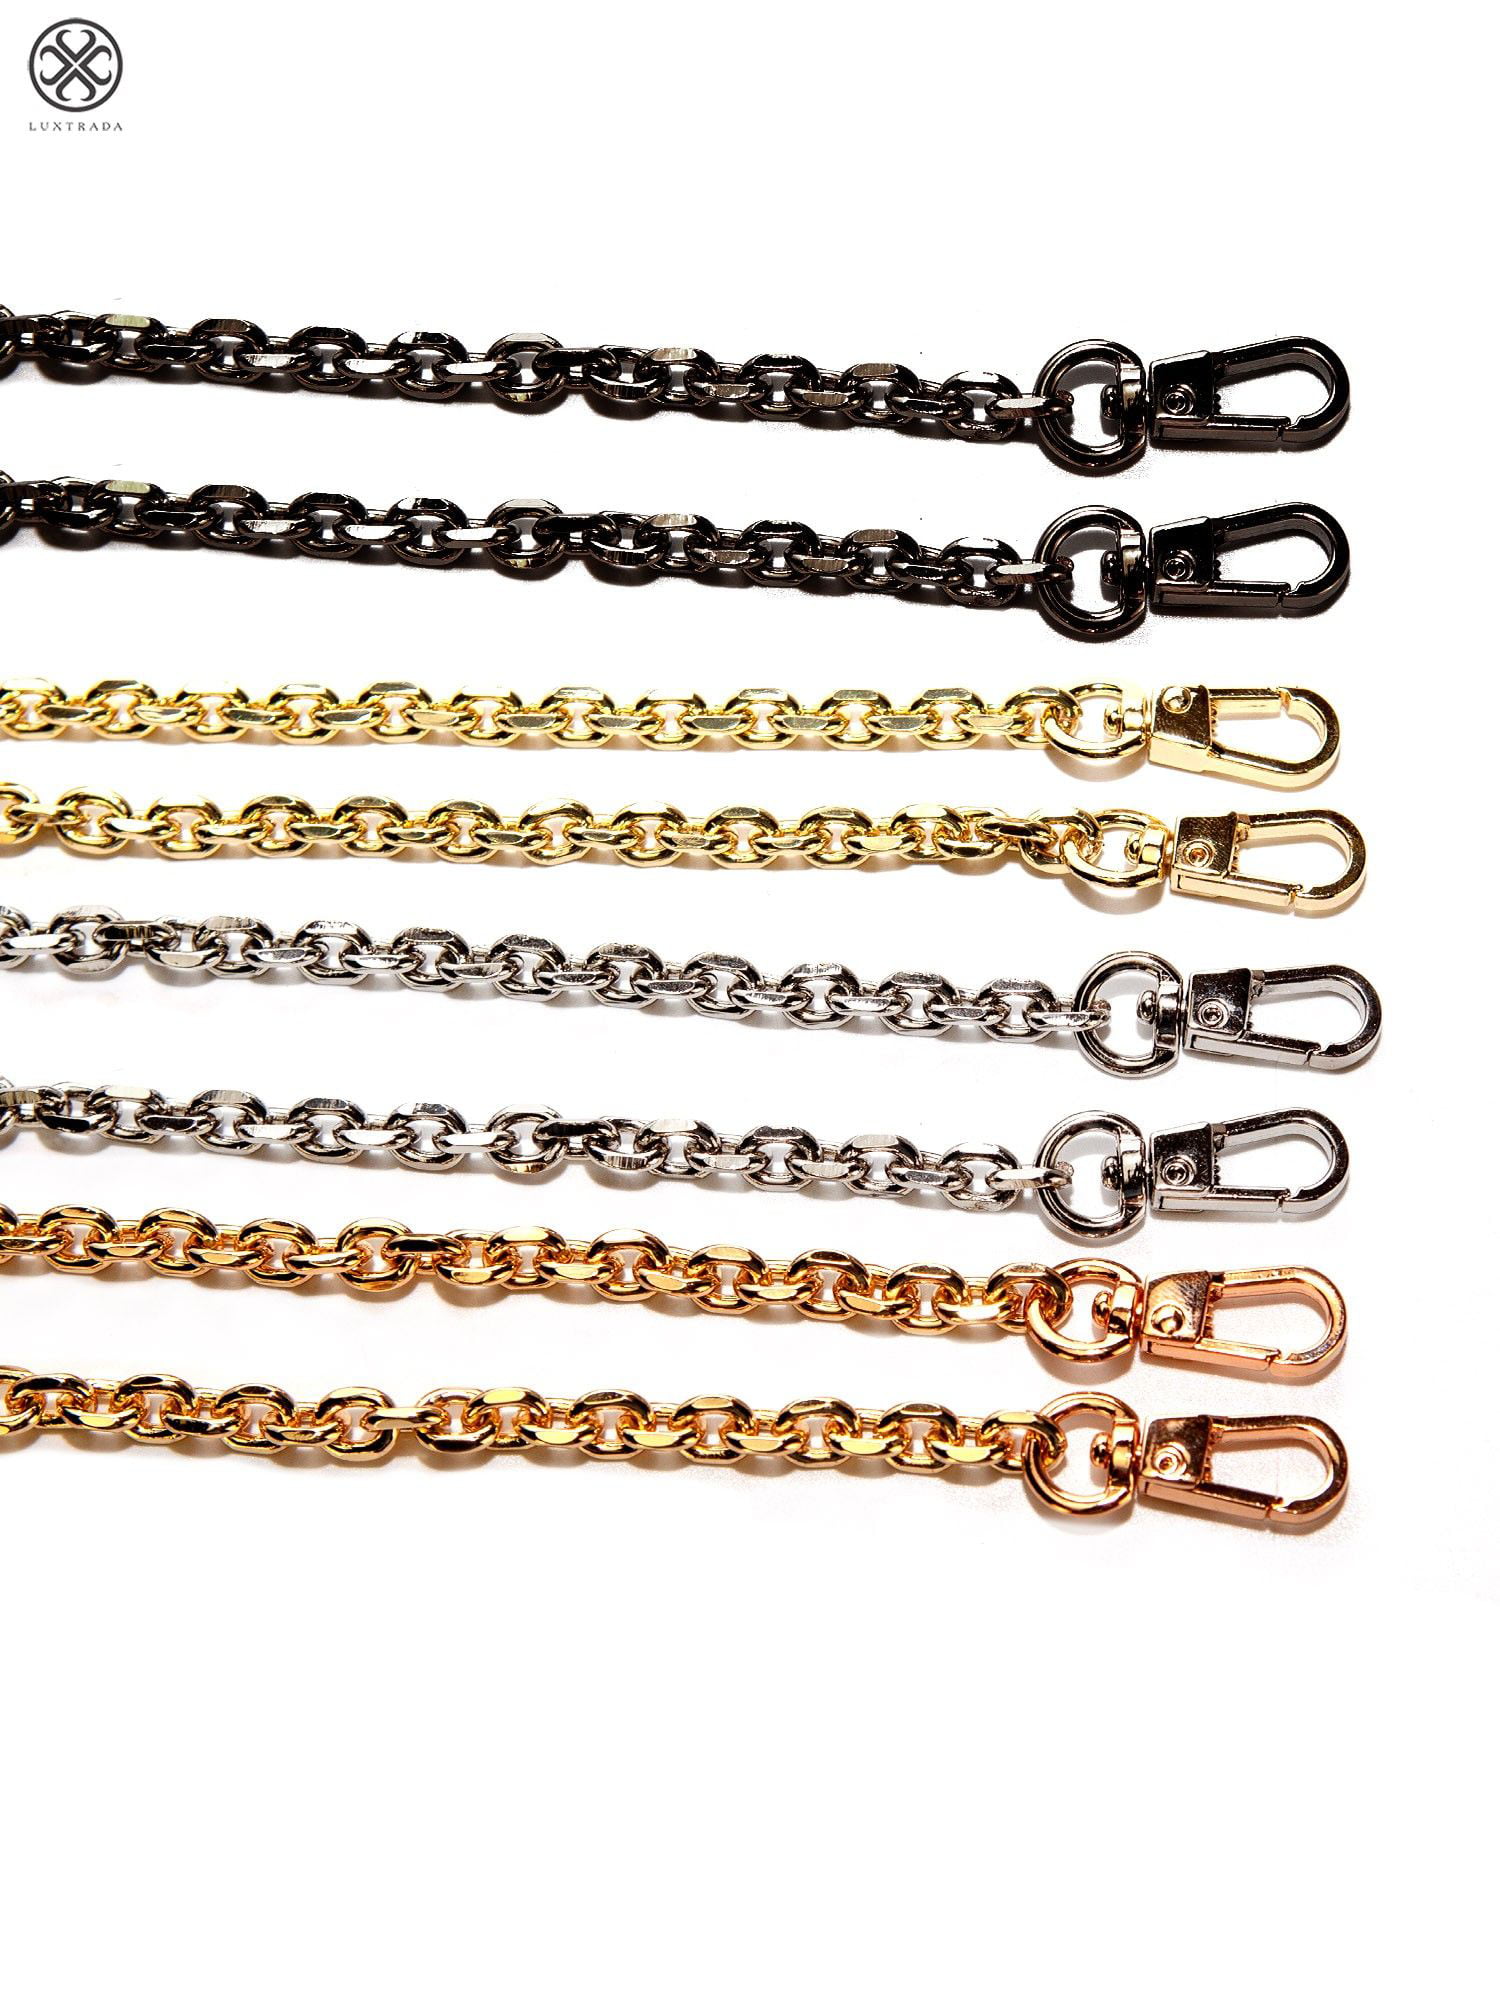 15mm High Quality Doughnuts Purse Chain Strap,alloy and Iron, Metal  Shoulder Handbag Strap,purse Replacement Chains,bag Accessories, JD-2697 